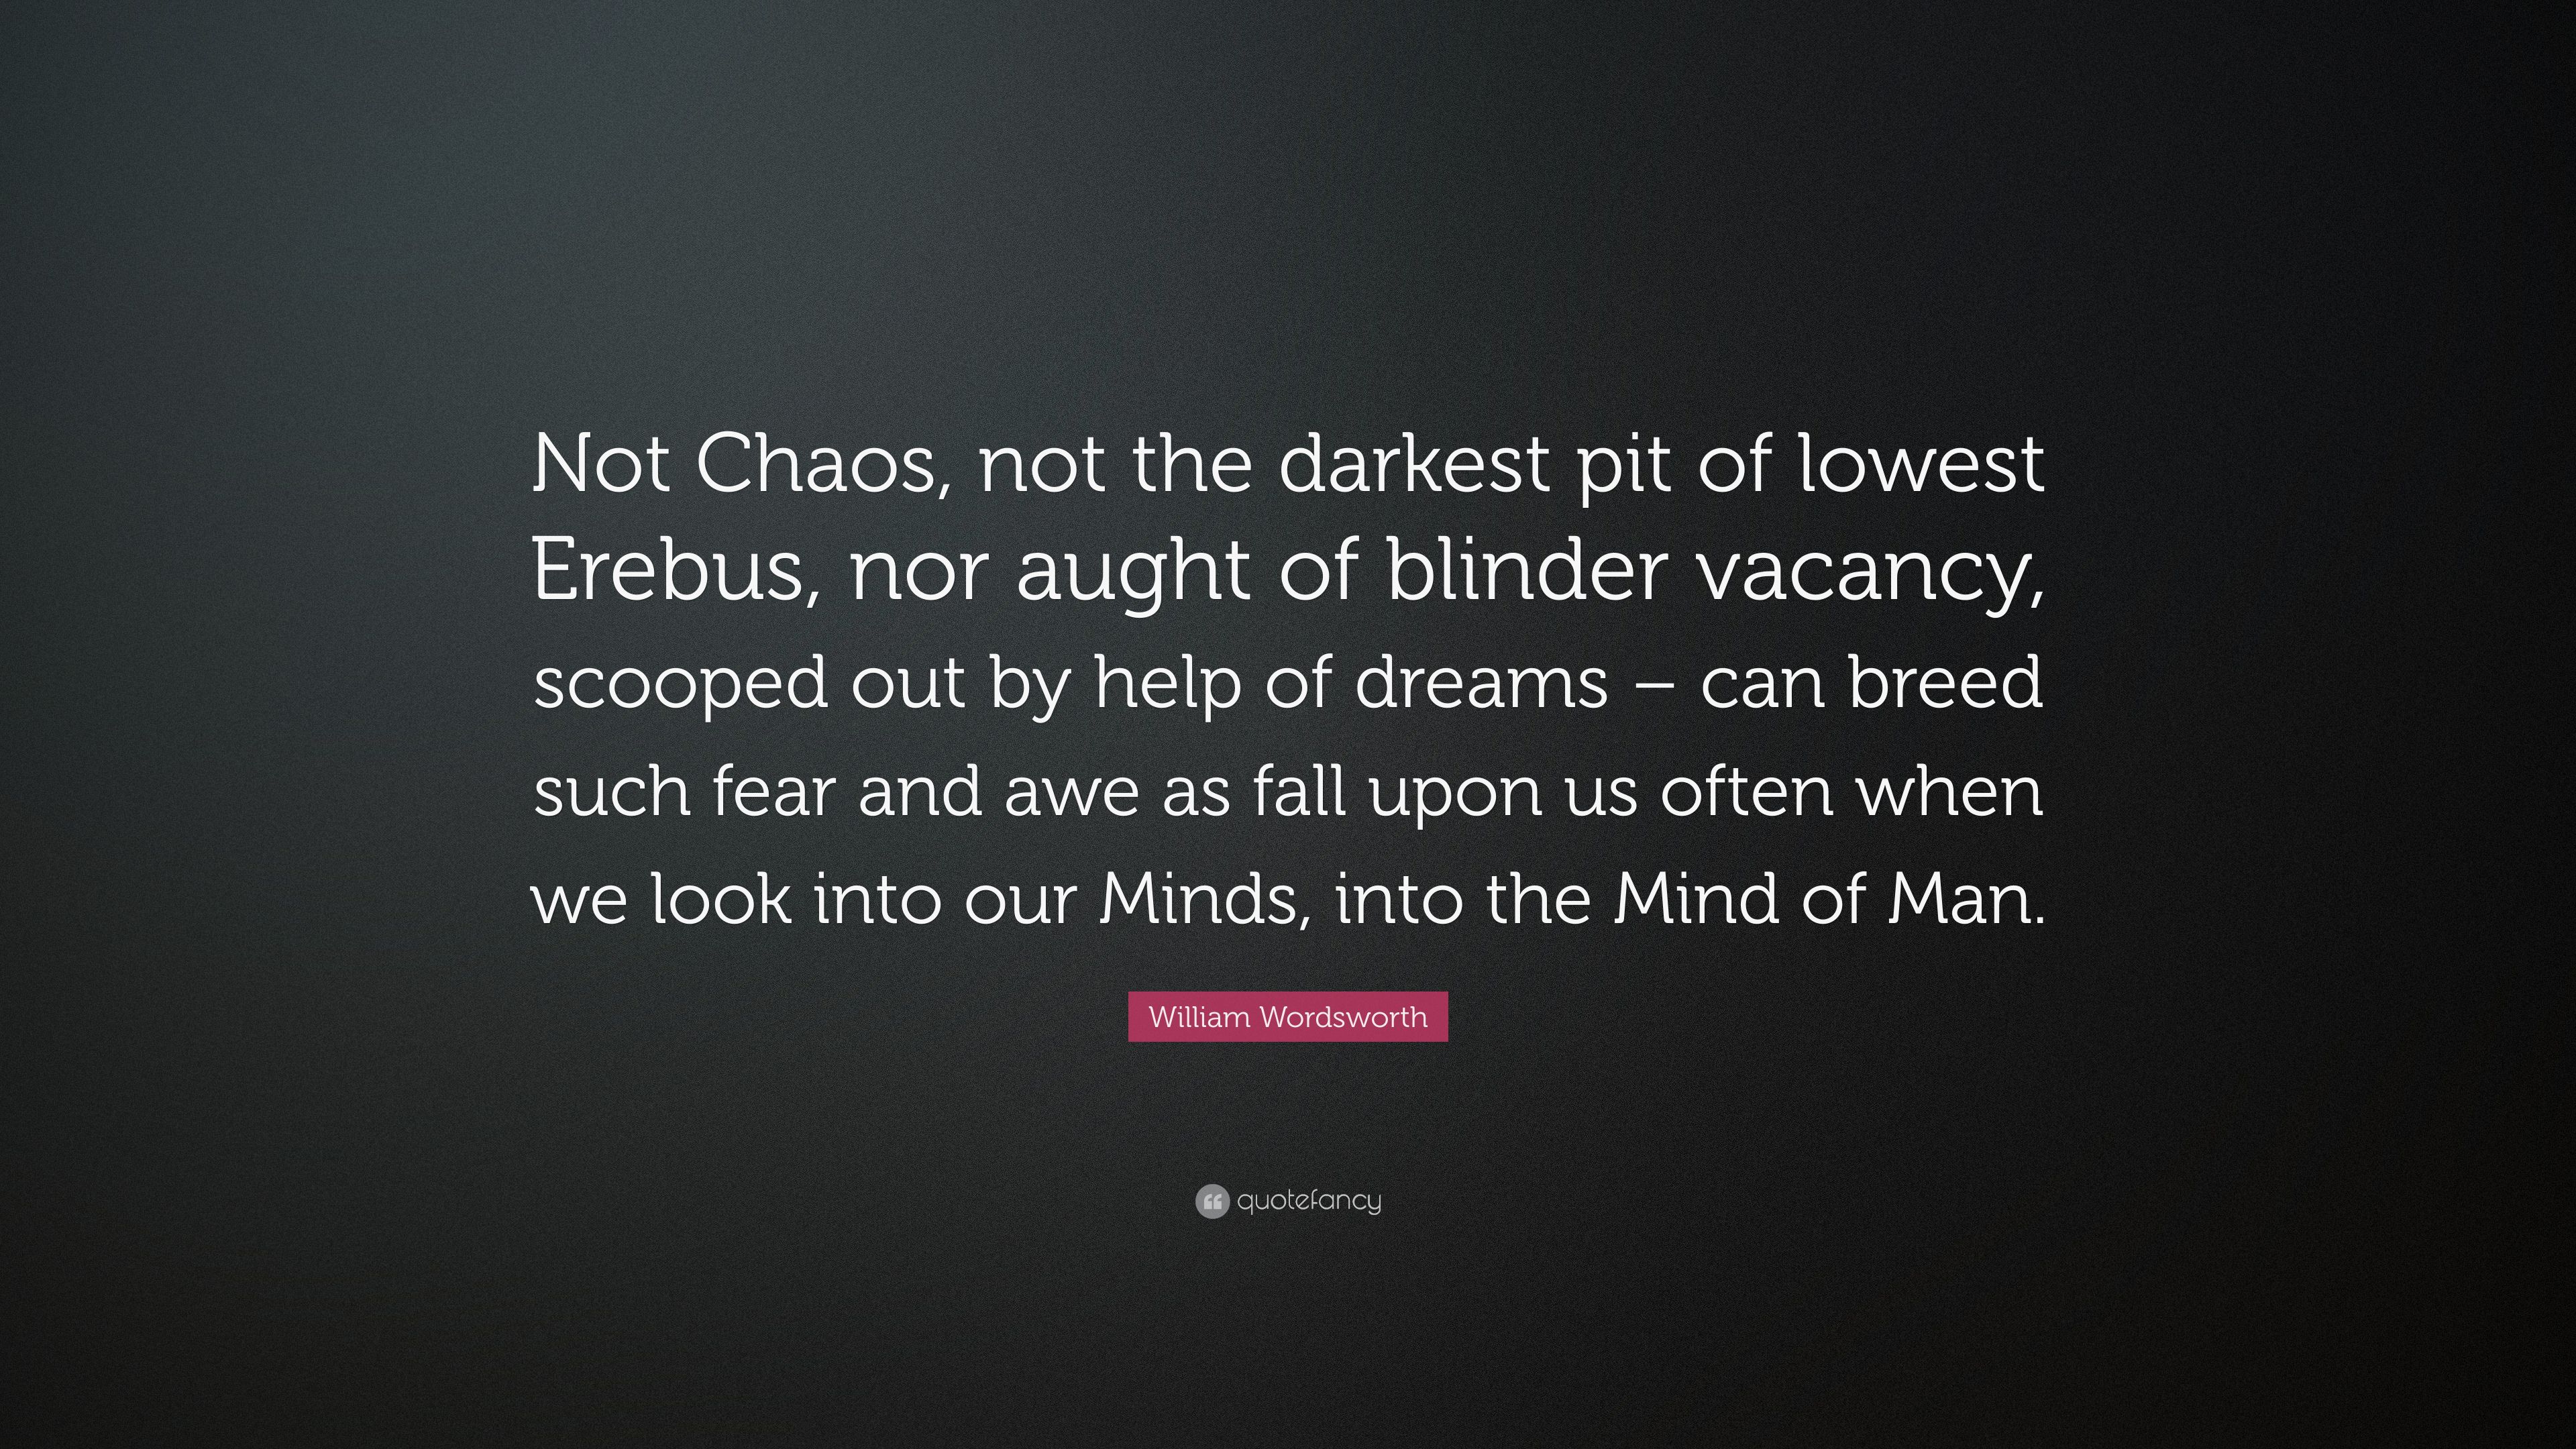 William Wordsworth Quote: “Not Chaos, not the darkest pit of lowest